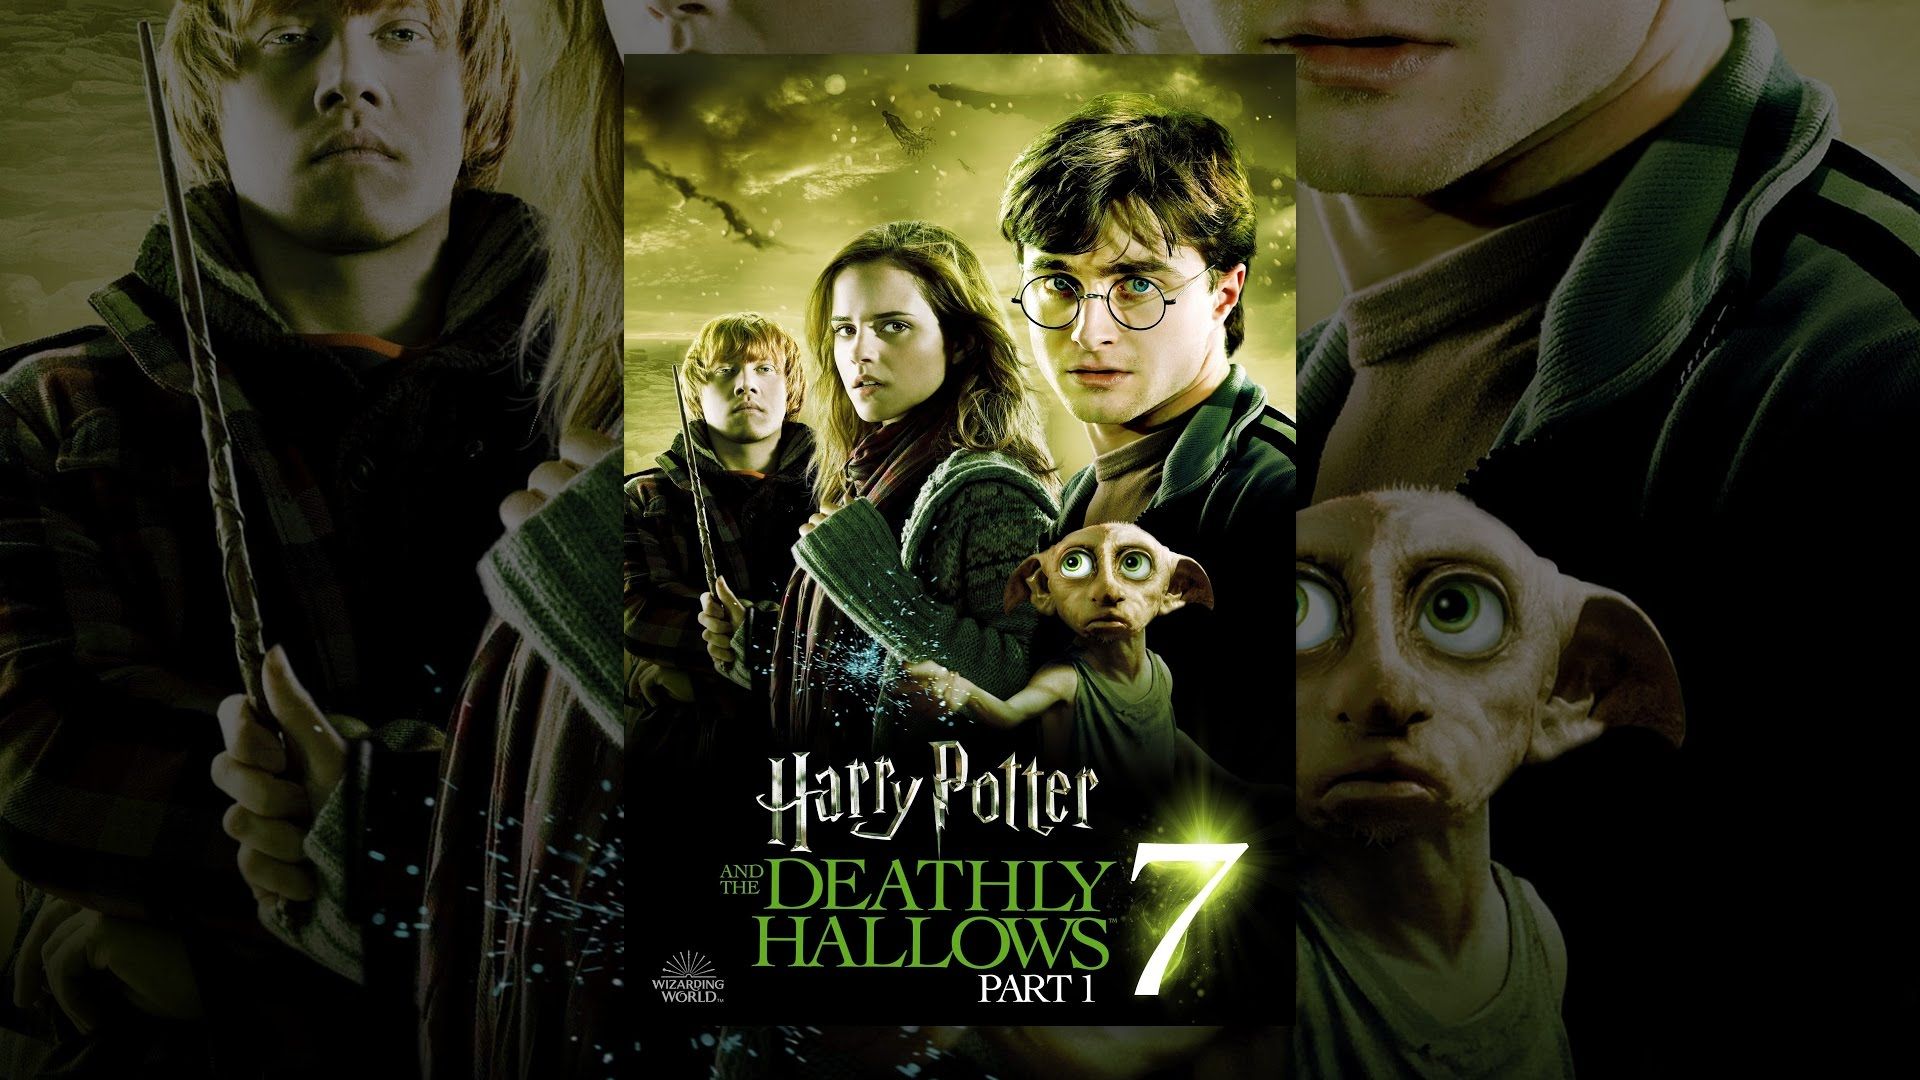 Harry Potter and the Deathly Hallows instal the new for android